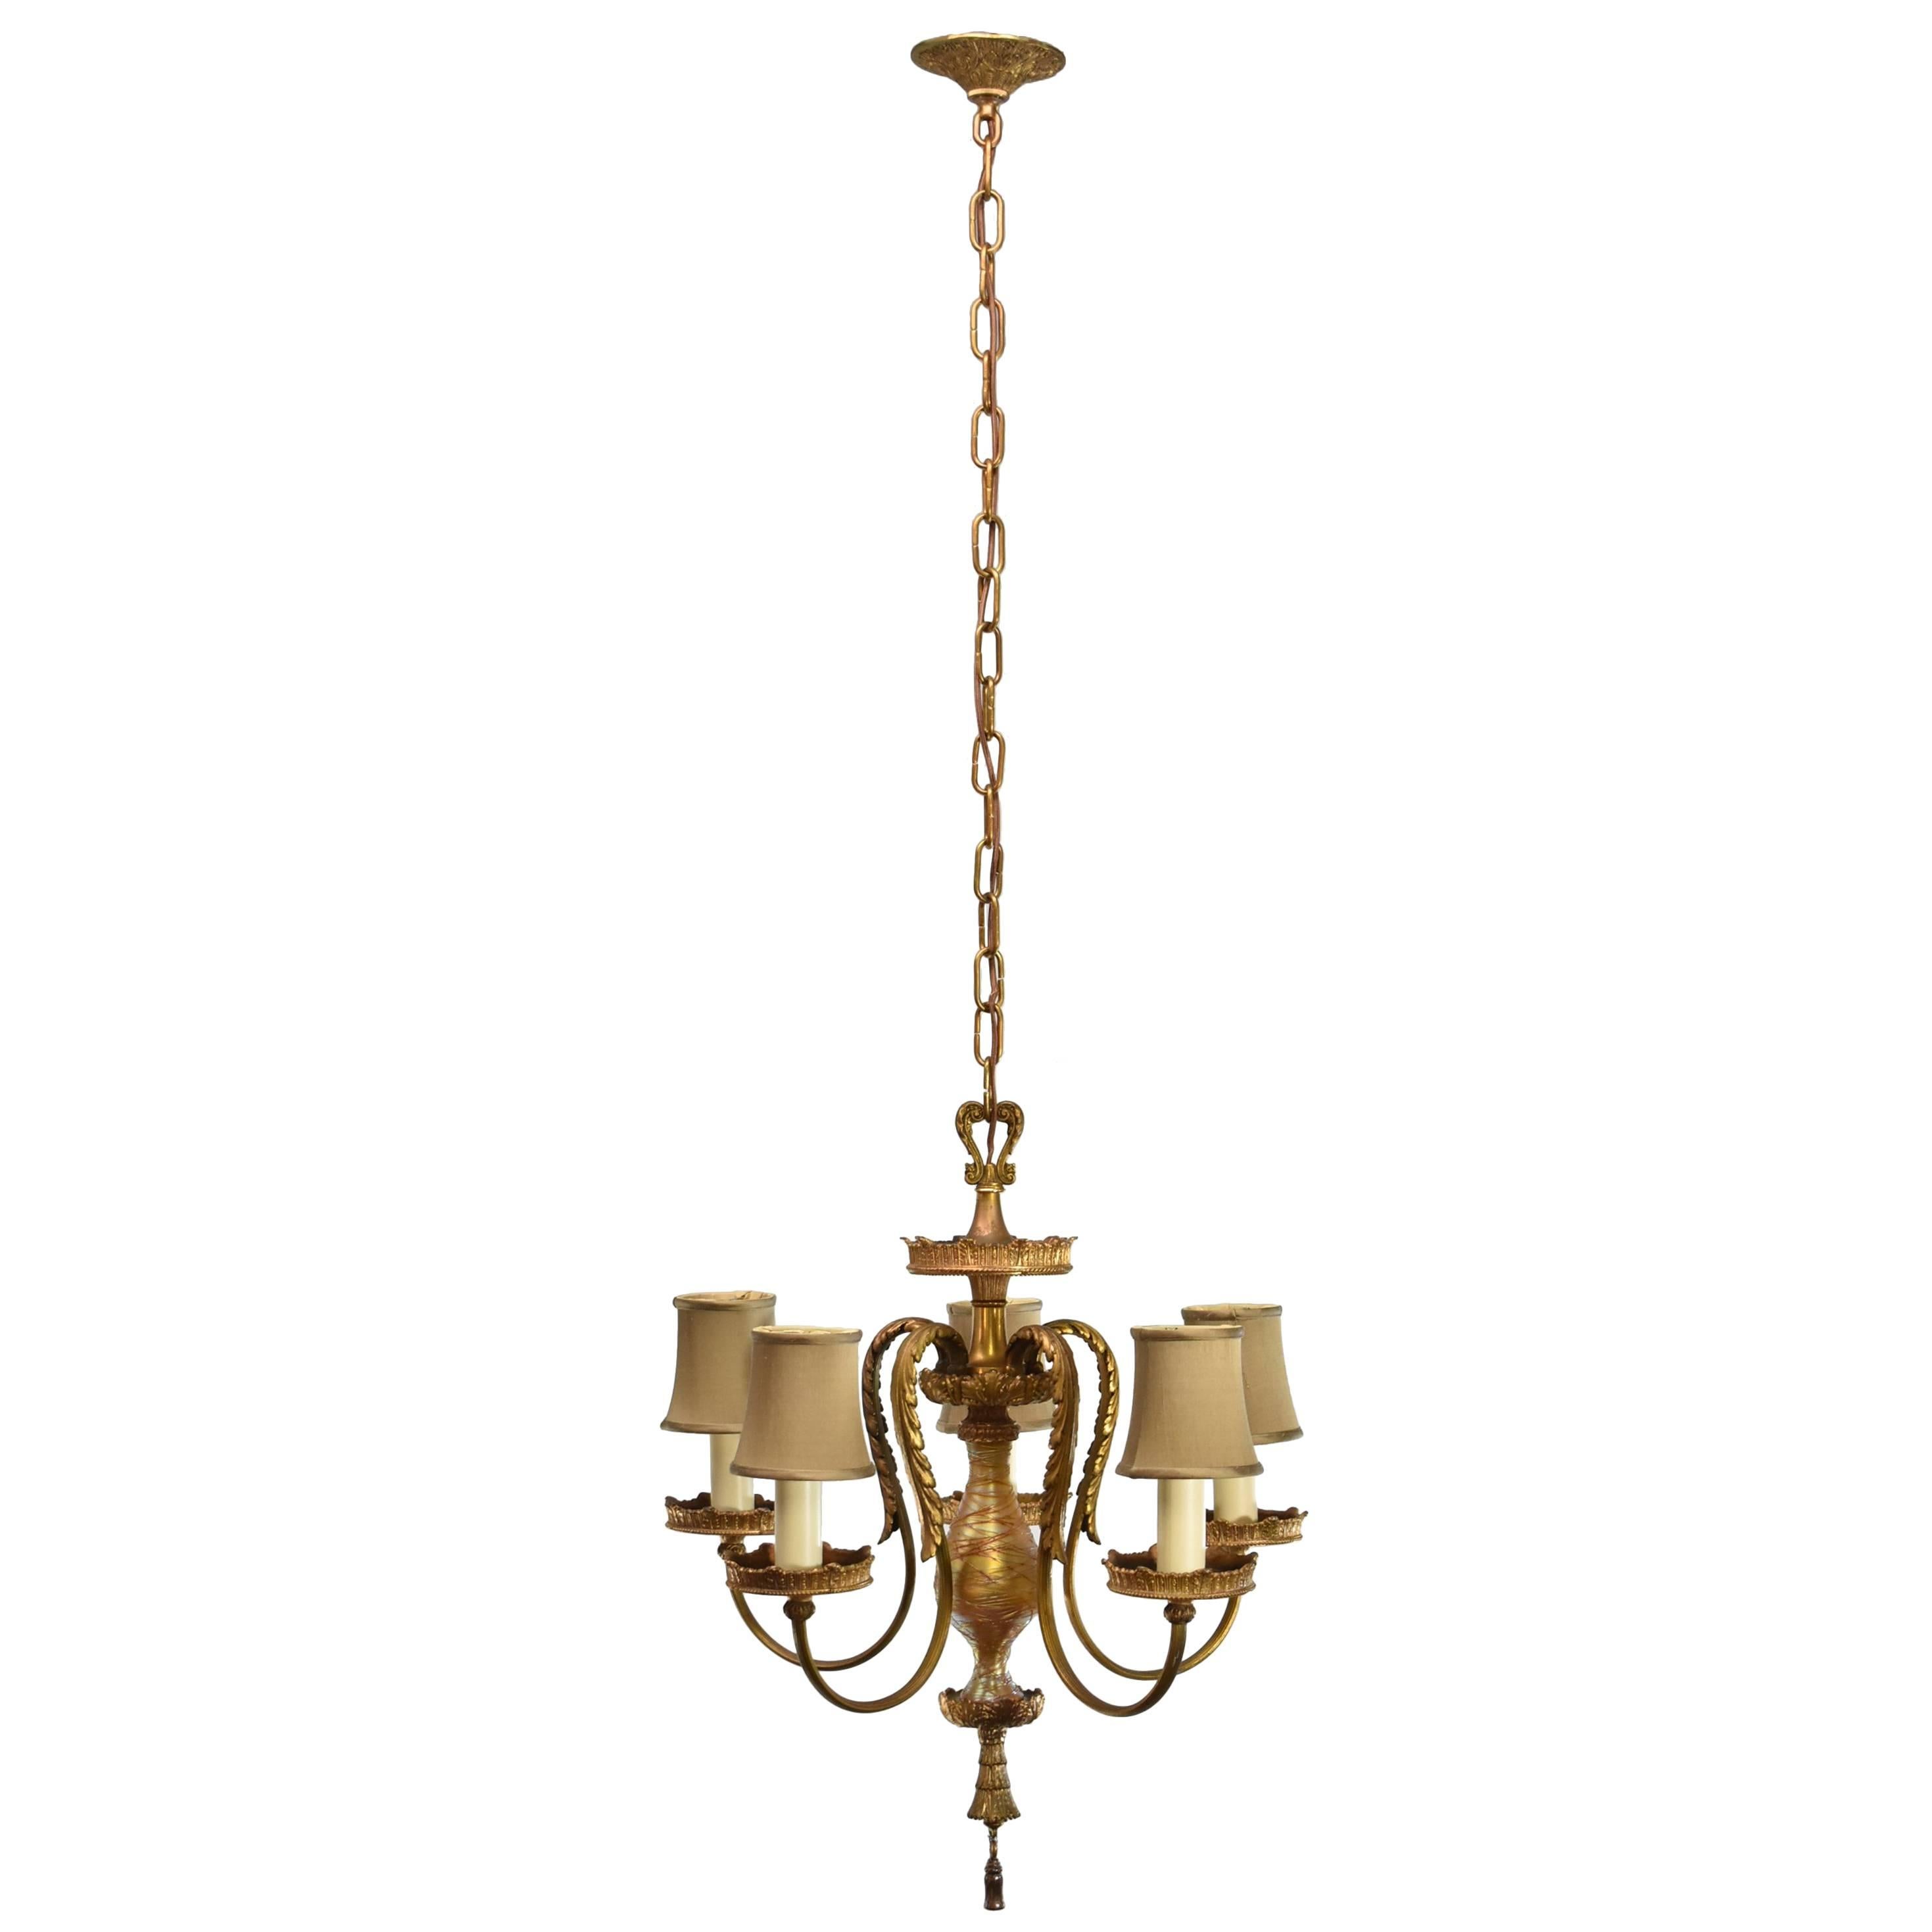 A beautiful five arm fixture in a gold doré finish. It has a gold handblown insert with applied threading with graceful ornate arms and metal work. It has been rewired with new candle covers and cloth wire. The shades are not included. It is 53